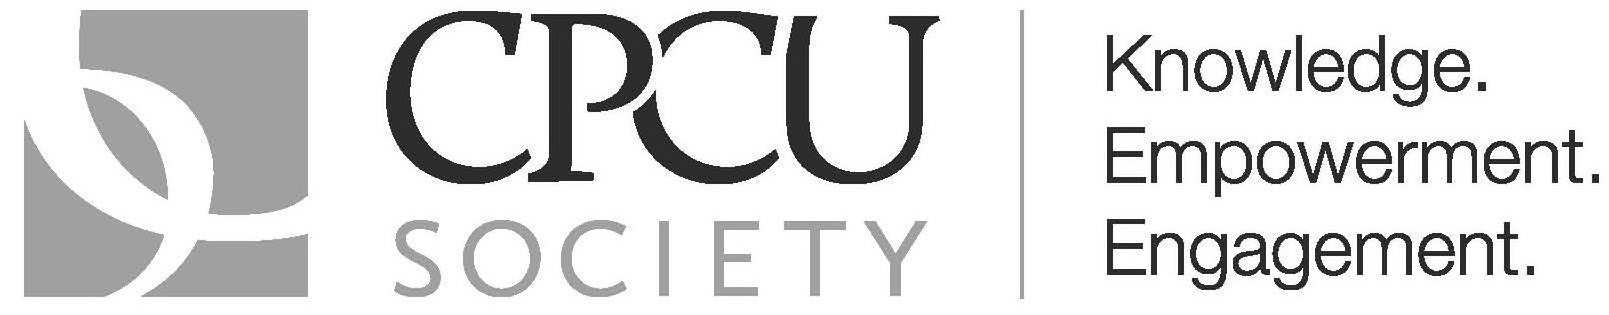  CPCU SOCIETY KNOWLEDGE. EMPOWERMENT. ENGAGEMENT.